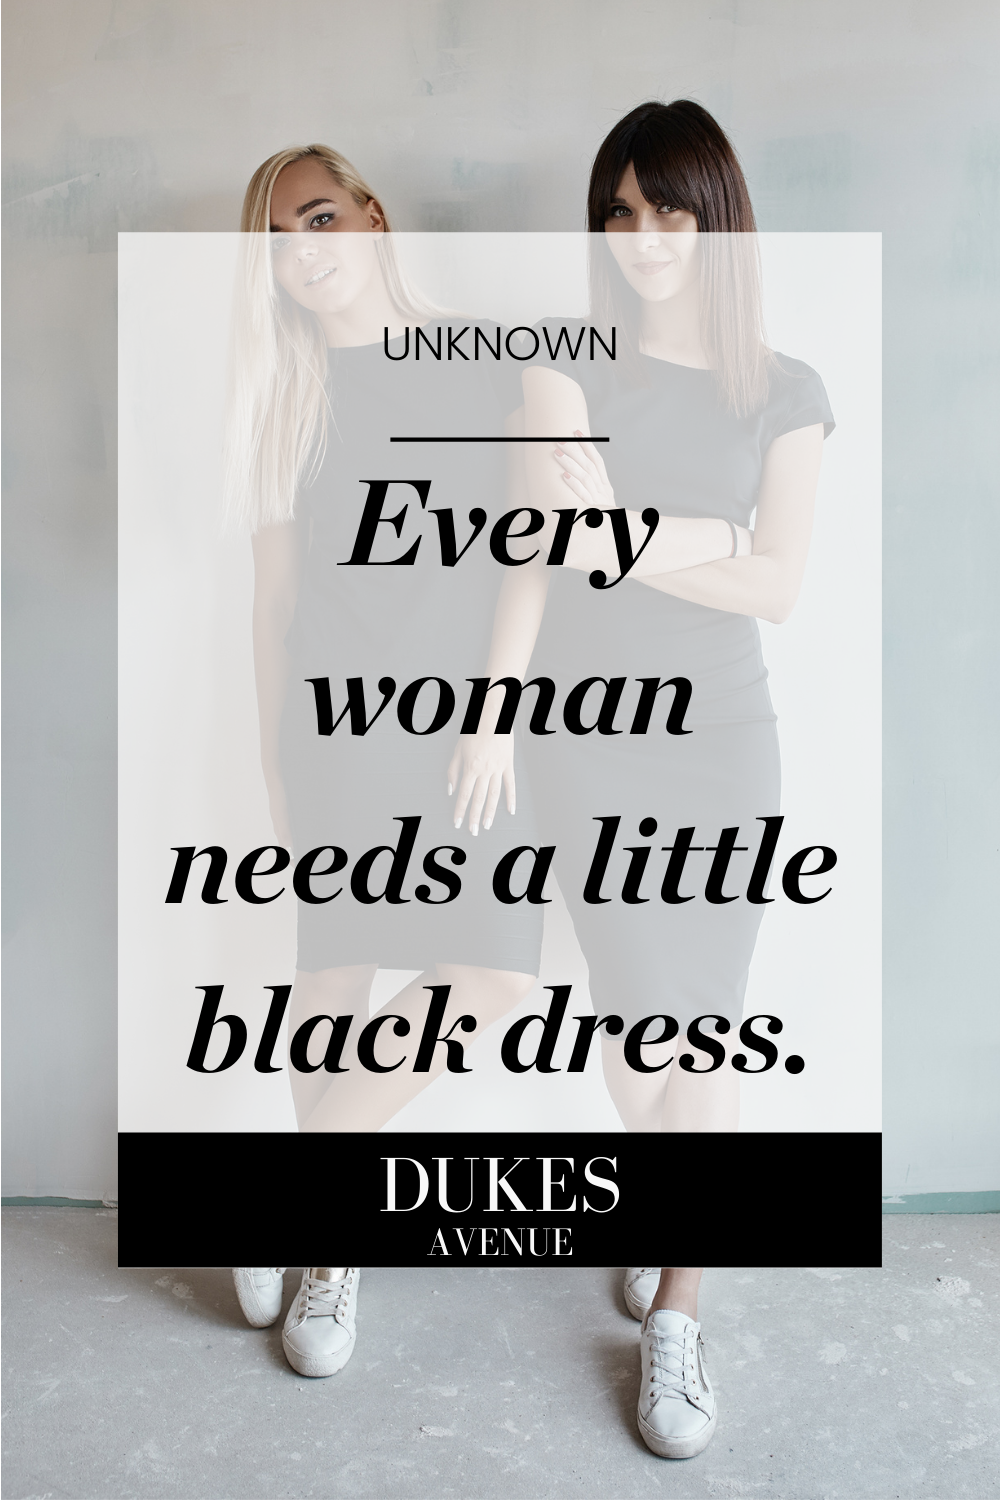 Two women wearing black dresses with text overlay of one of the black dress quotes in the article.